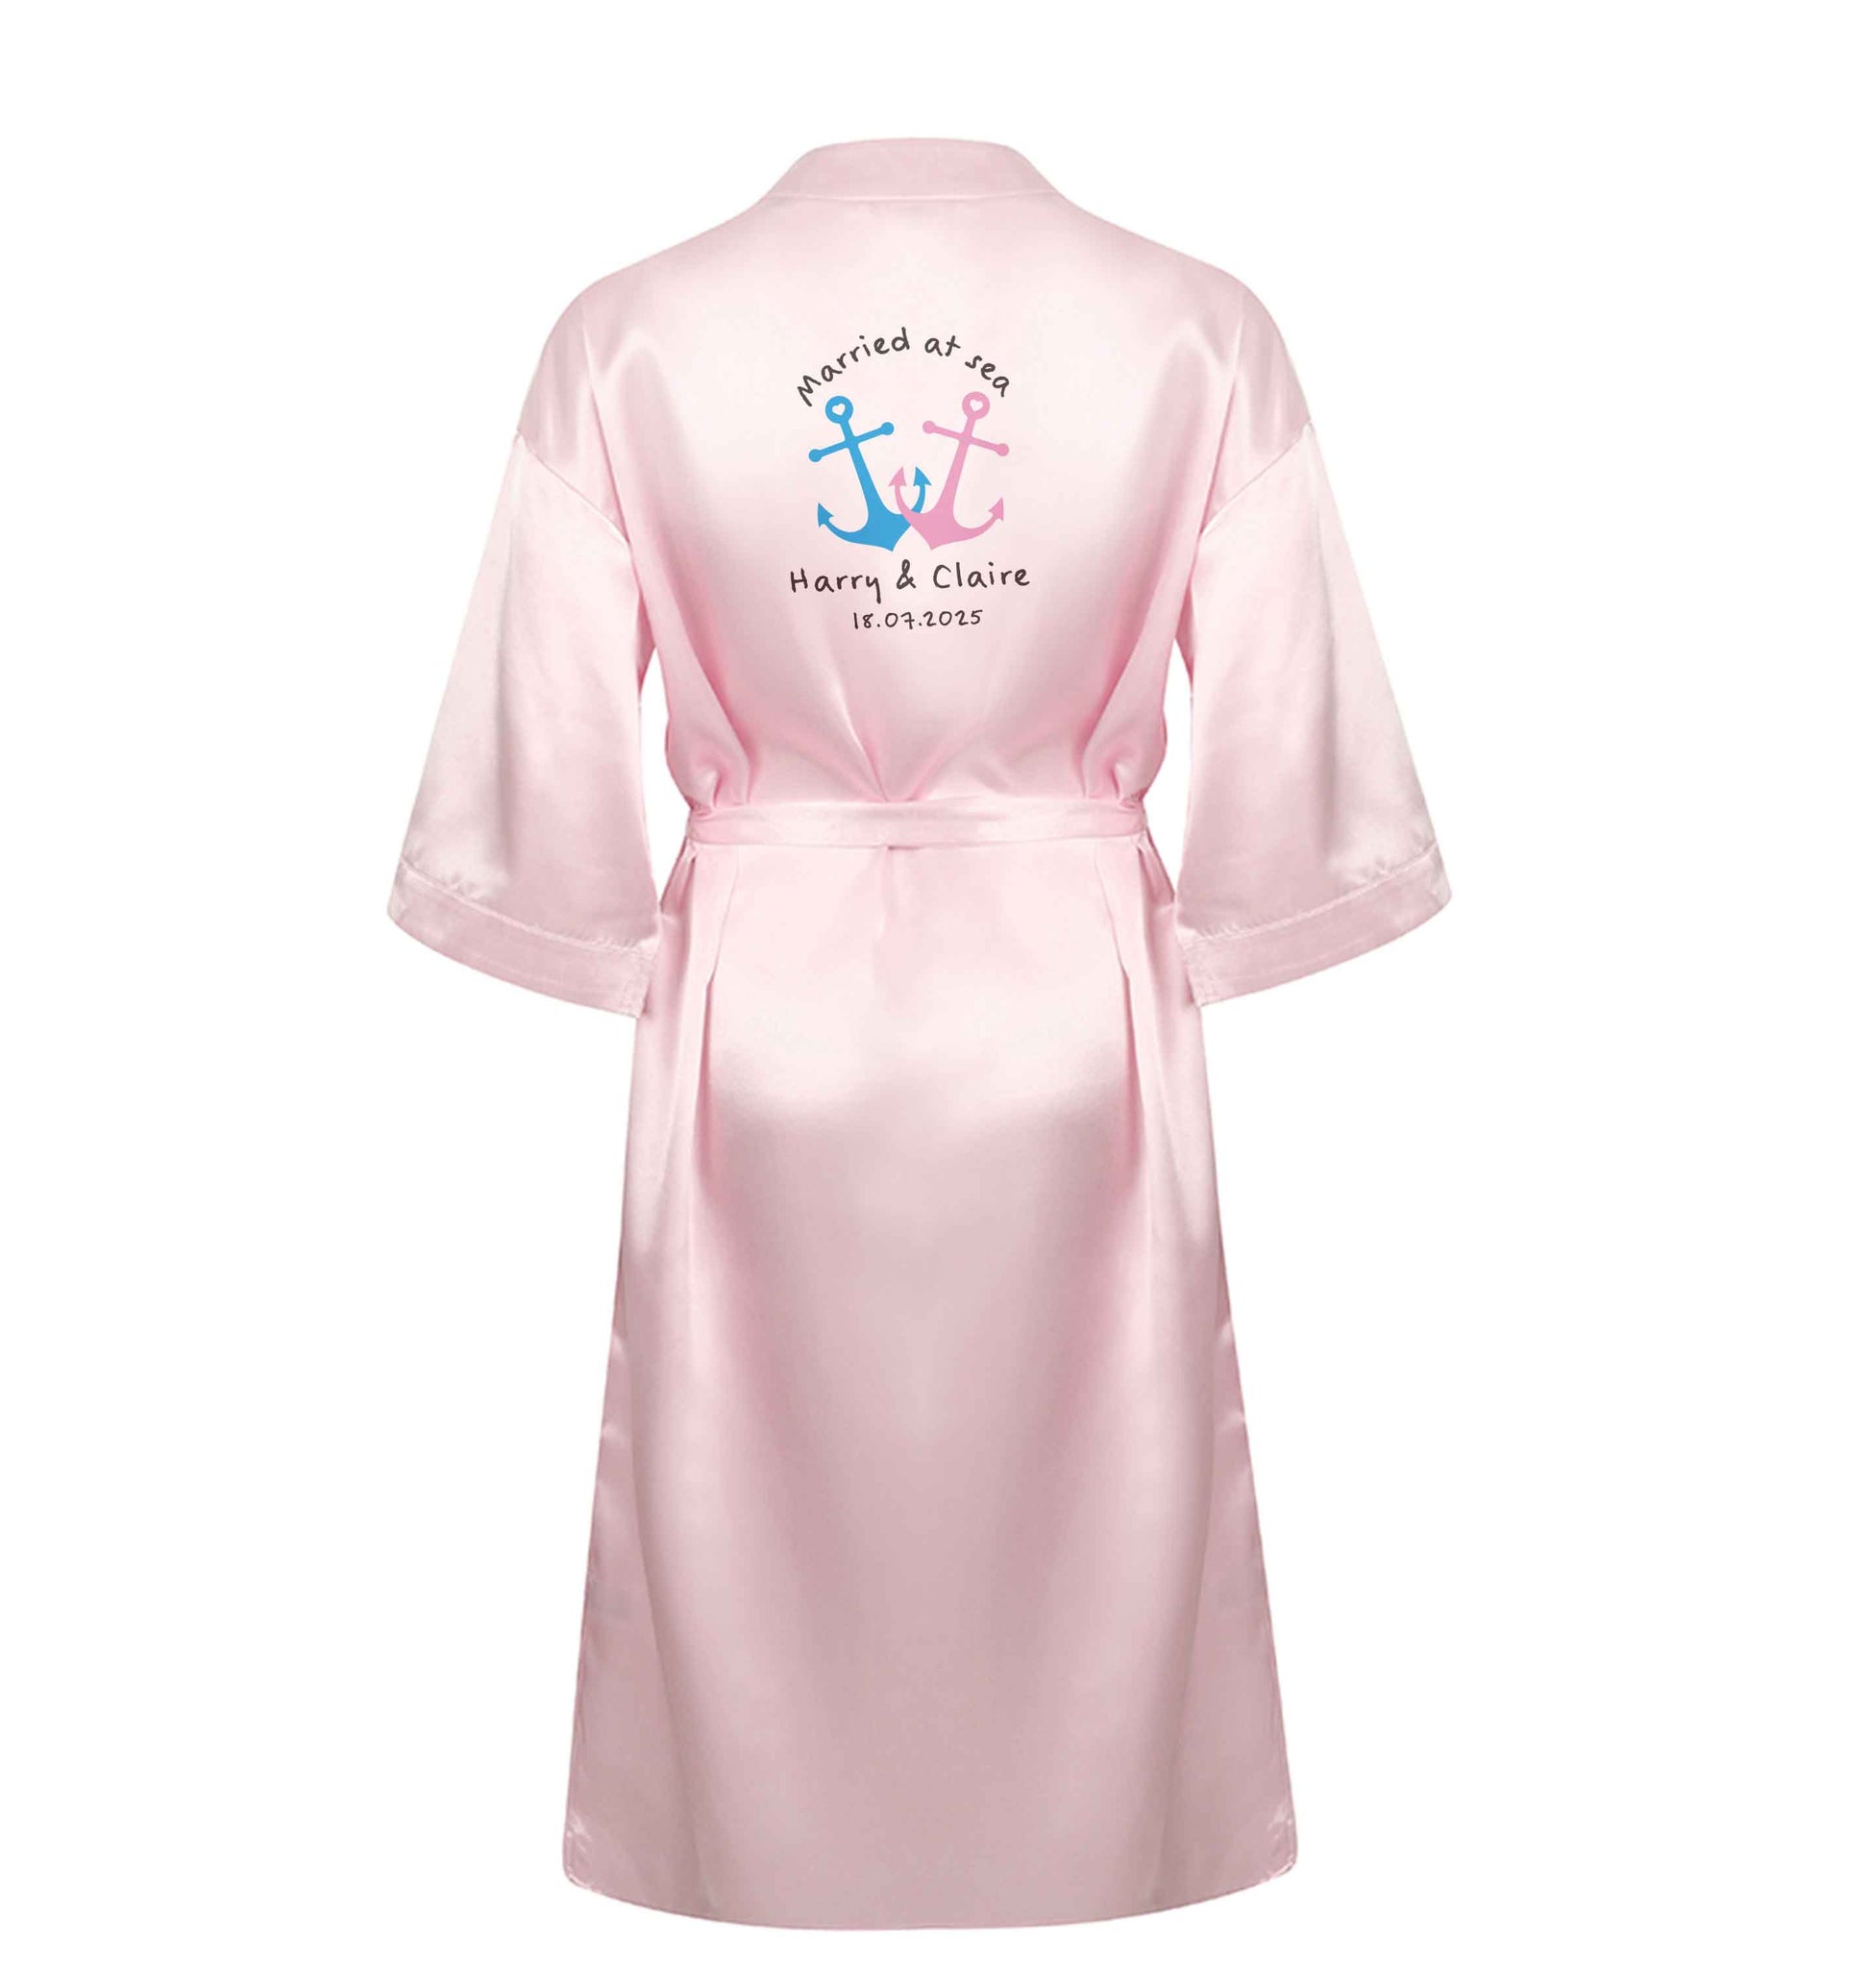 Married at sea XL/XXL pink ladies dressing gown size 16/18